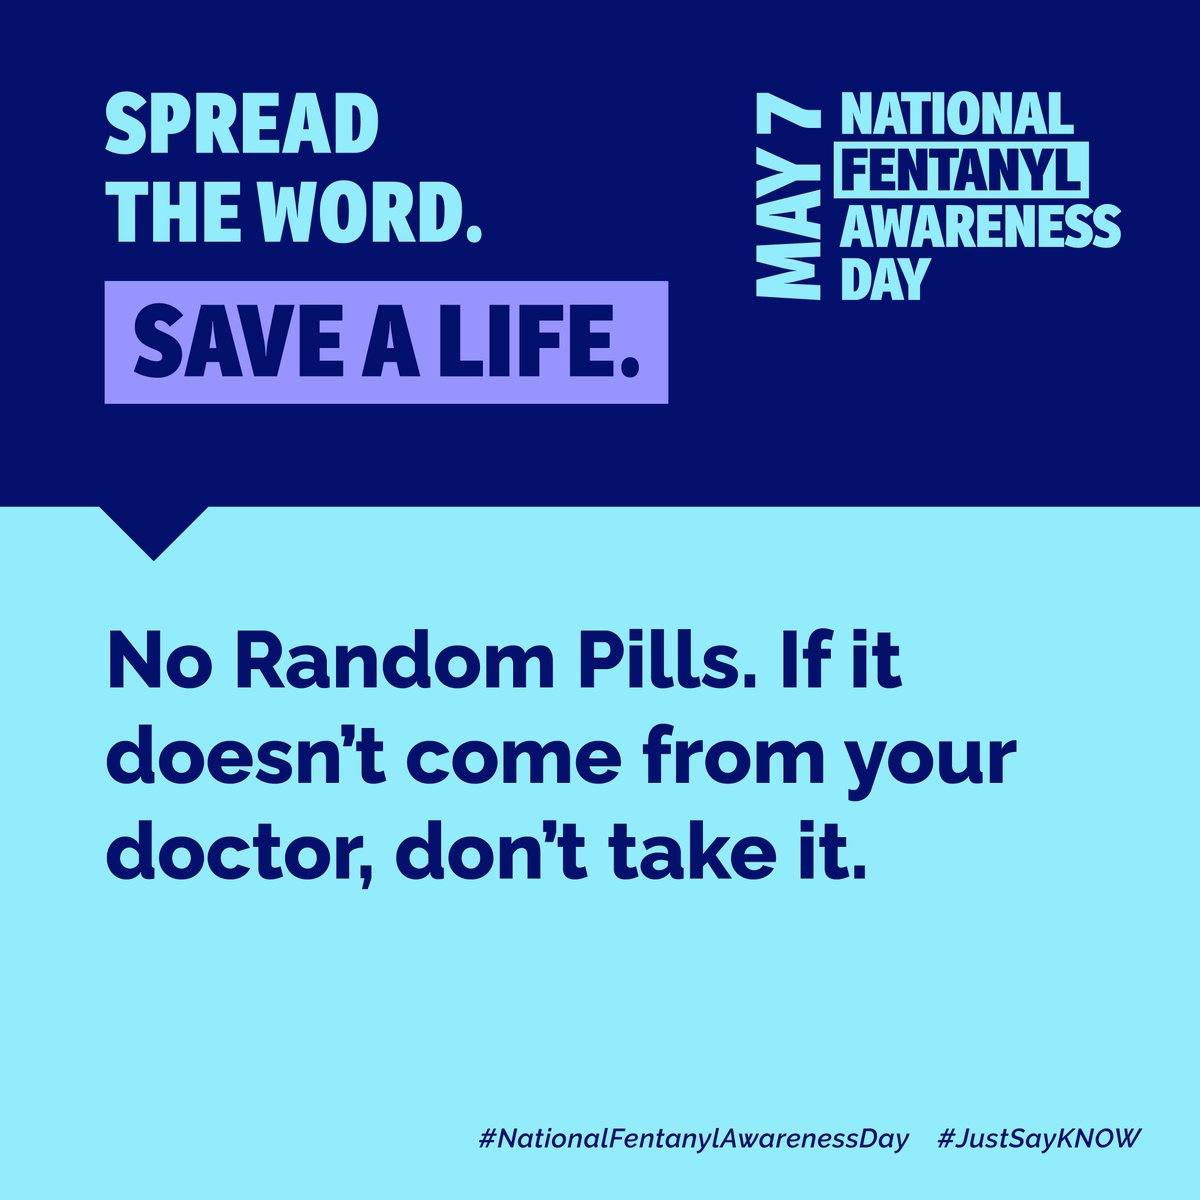 On the 3rd National Fentanyl Awareness Day, let's unite to combat this crisis. Over 70,000 lives lost last year. But there's hope. Watch 'Counterfeit Pills — You Need to Know' & host screenings of 'The New Drug Talk.' Let's educate, advocate, and save lives. 💪 #FentanylAwareness